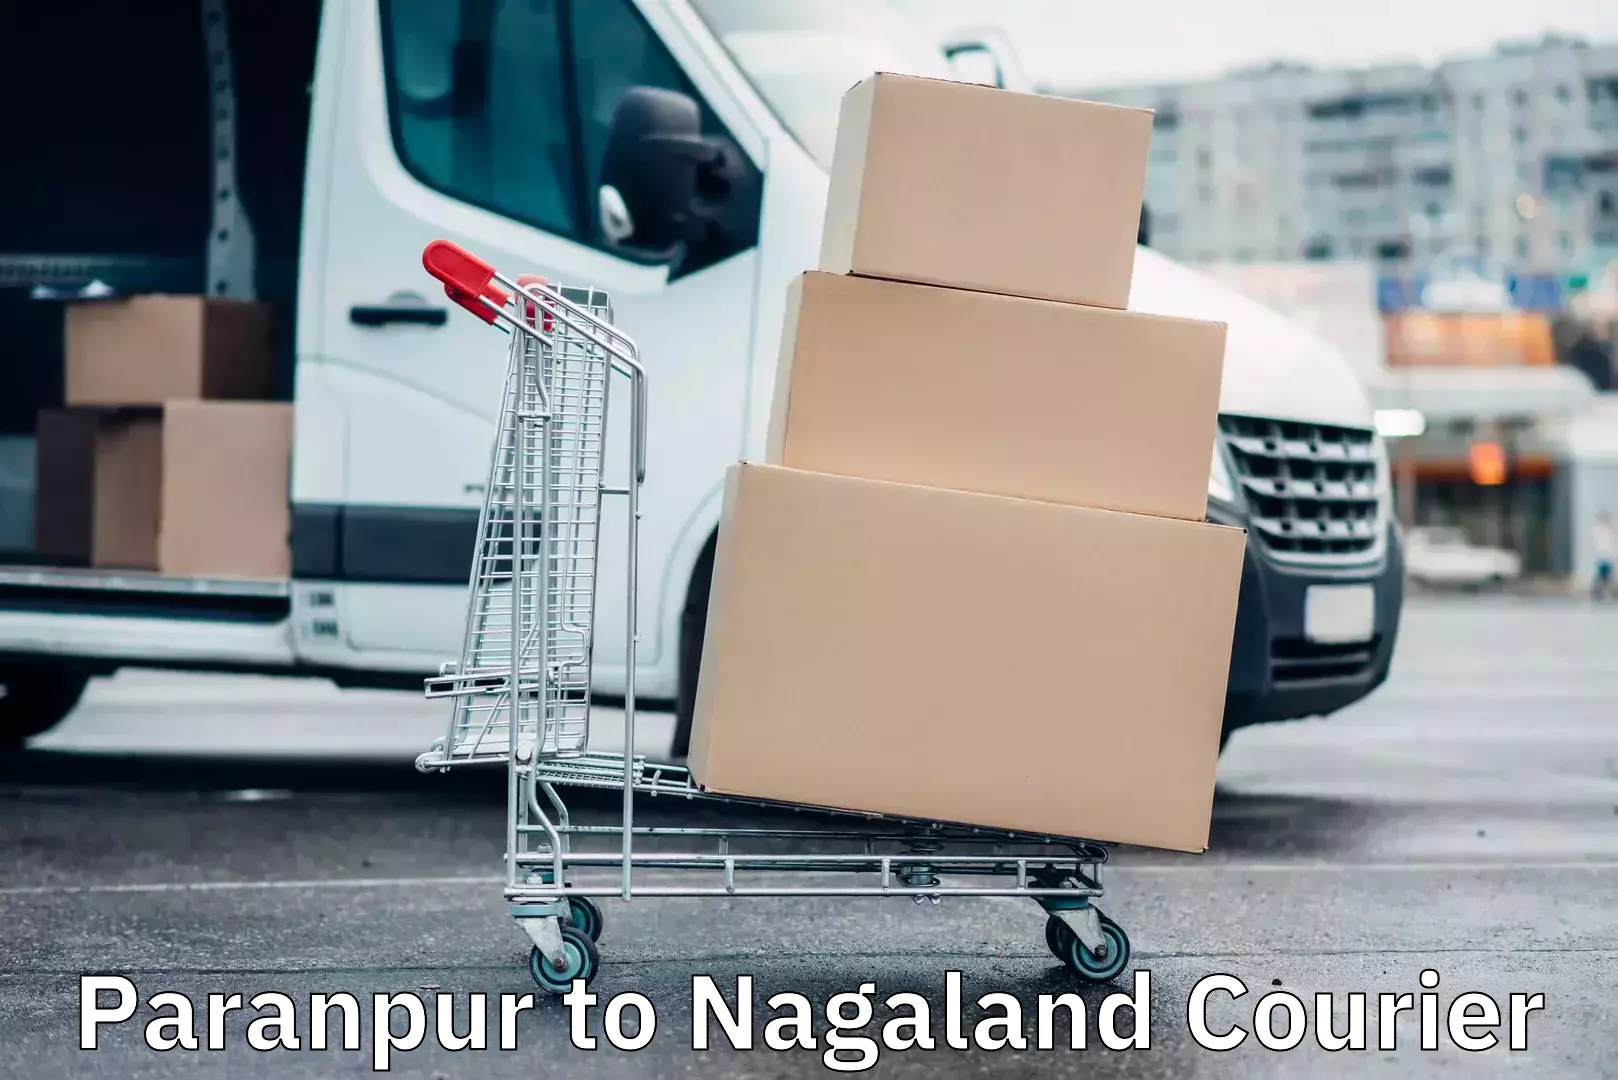 Same-day delivery options Paranpur to Nagaland